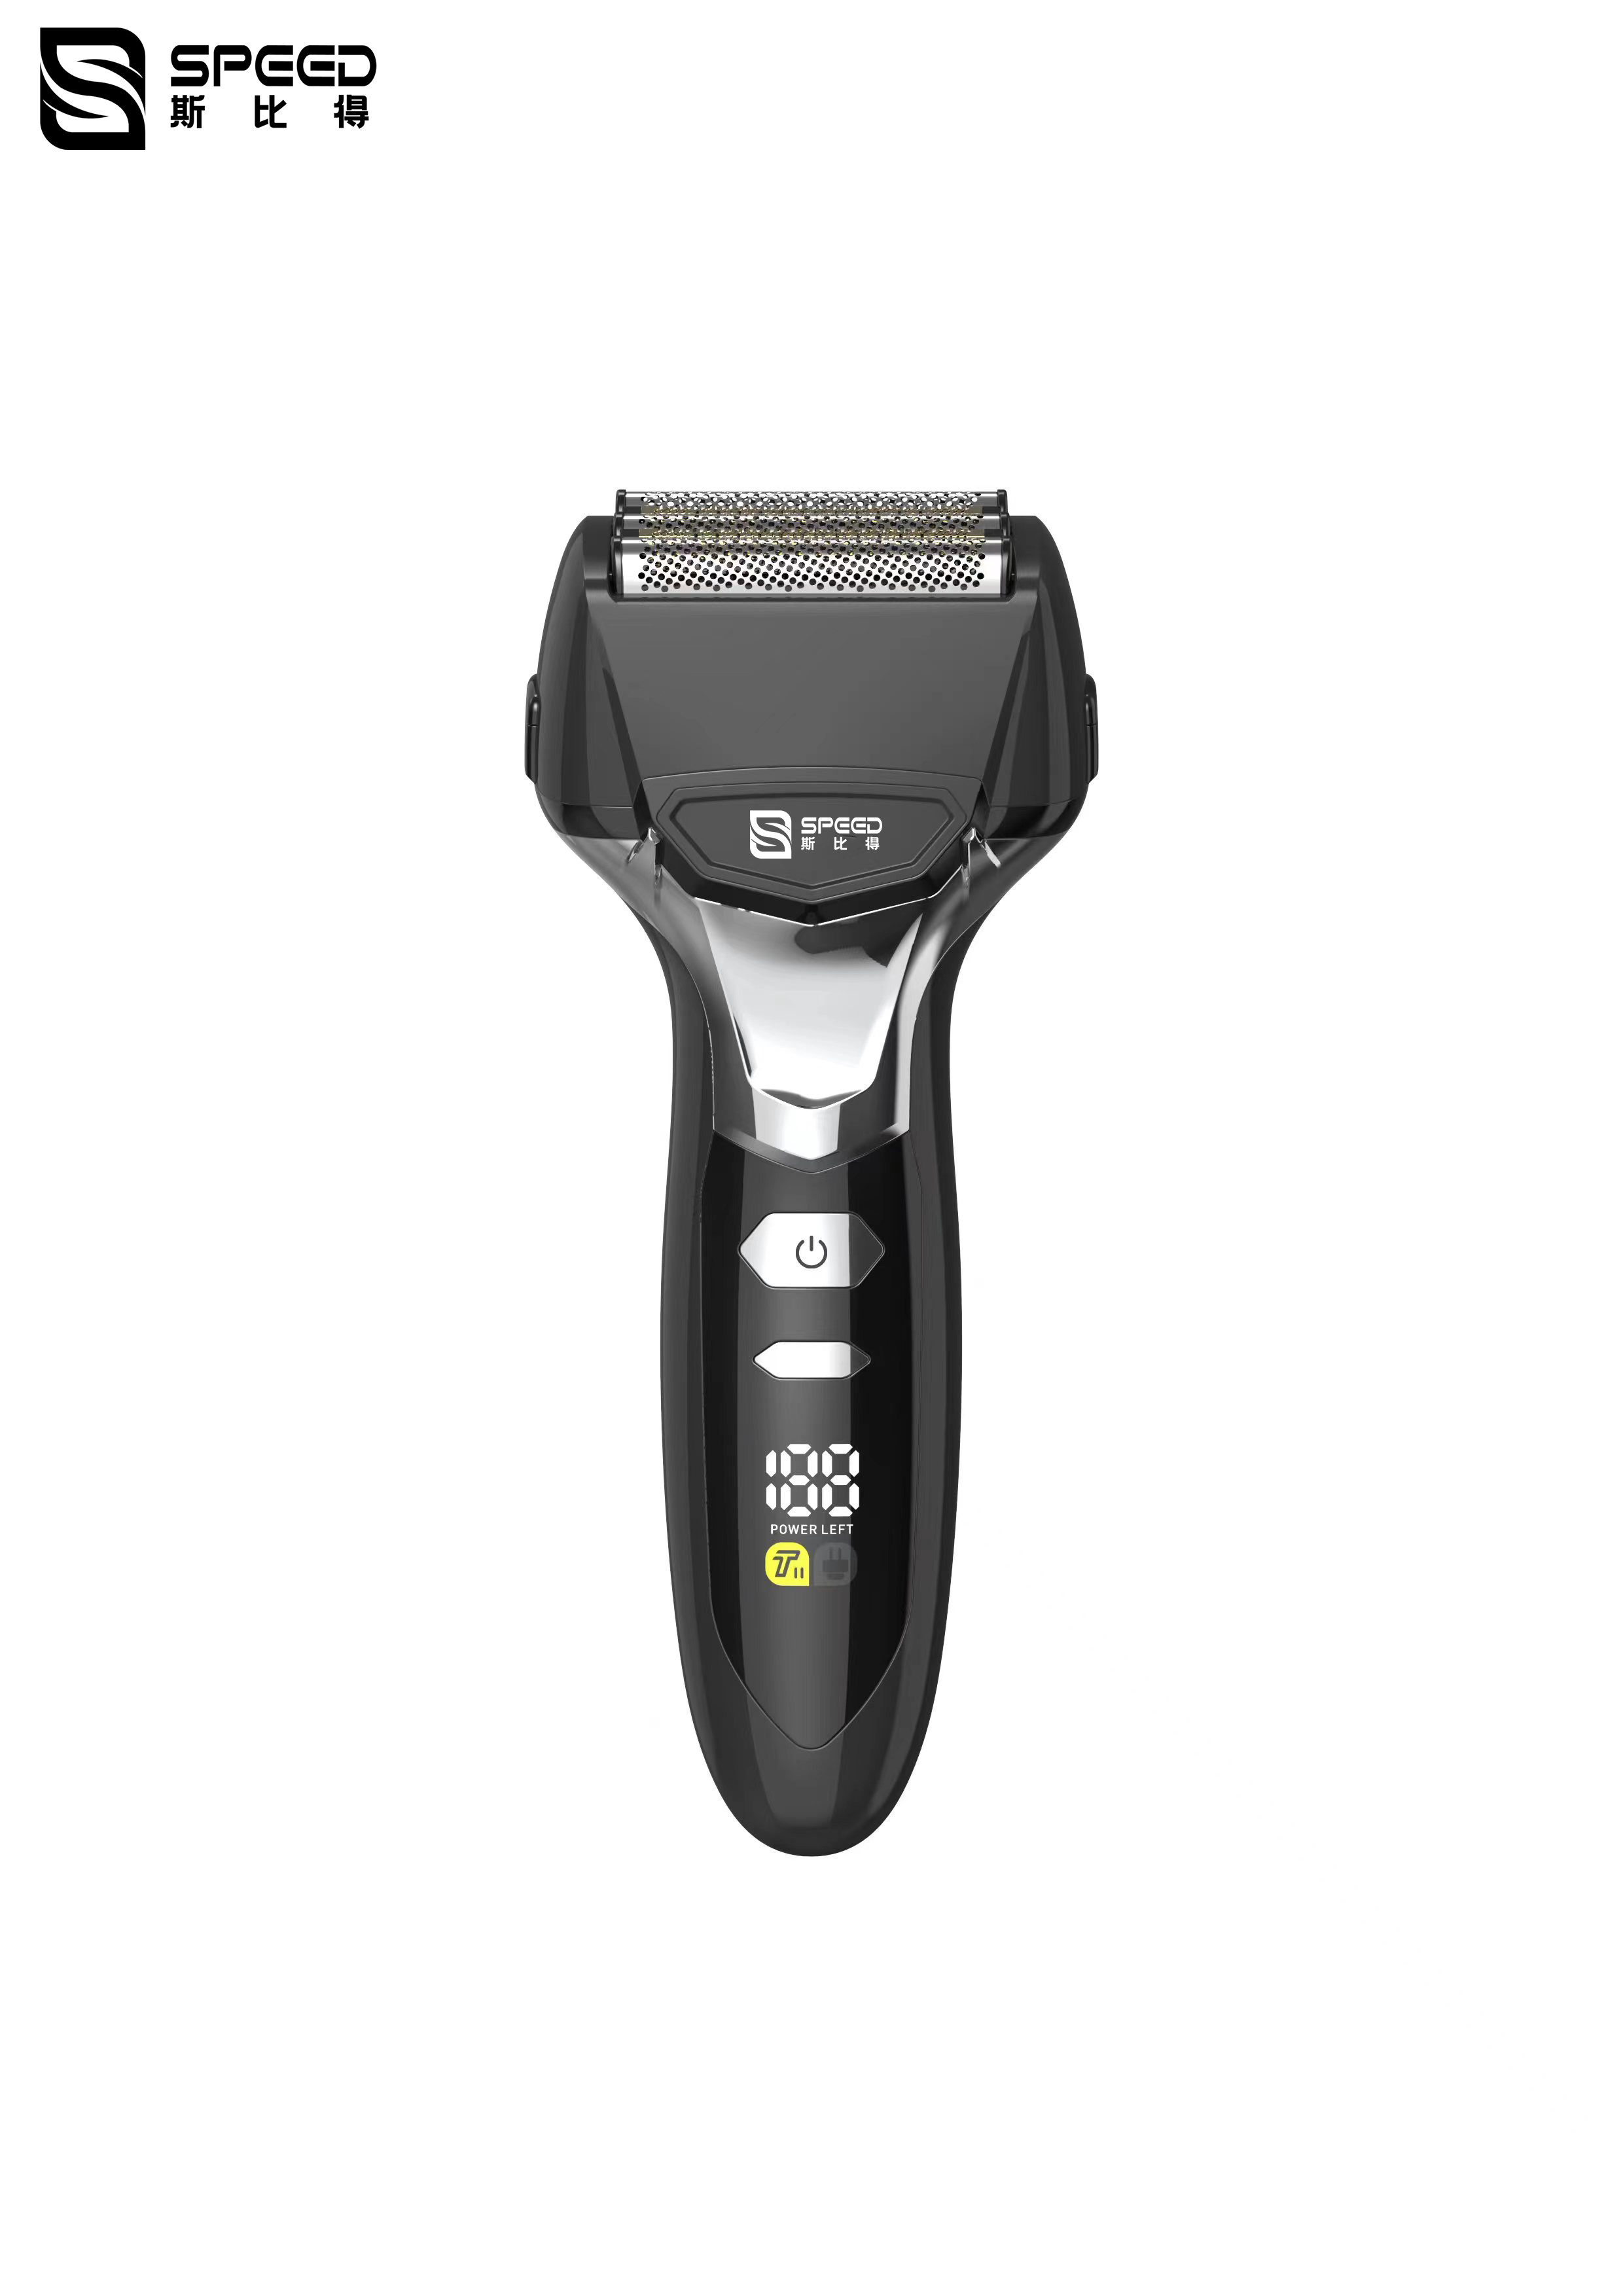 China Lightweight body, capable of handling five blades High power and fast men's electric shaver factory